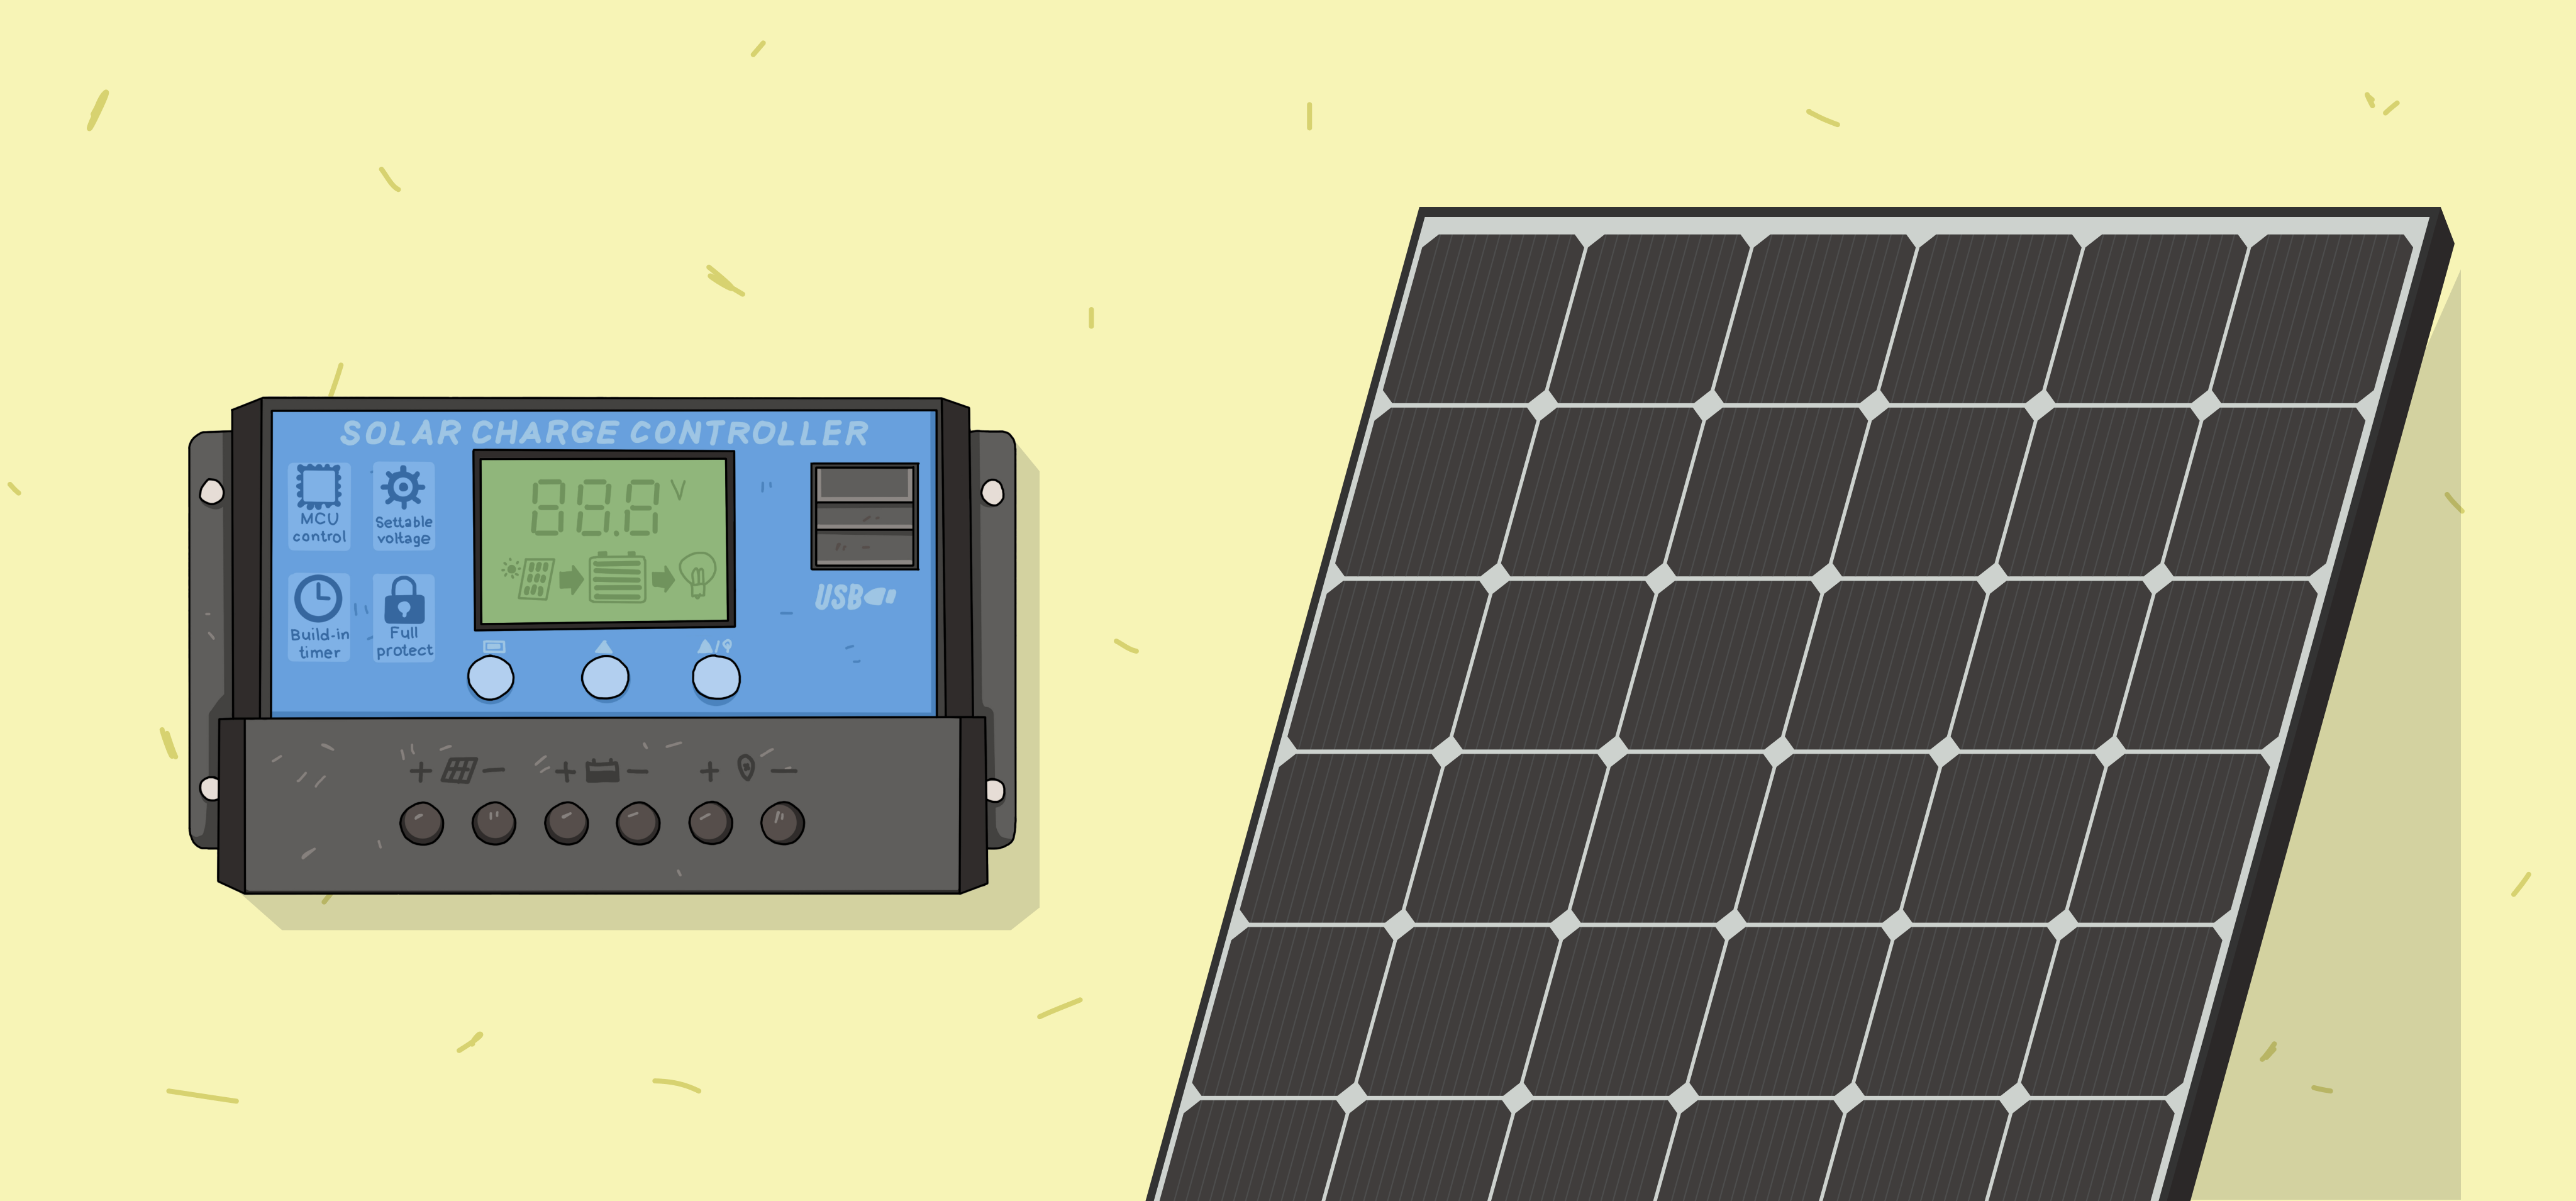 How to connect solar panels to charge controller – A1 SolarStore